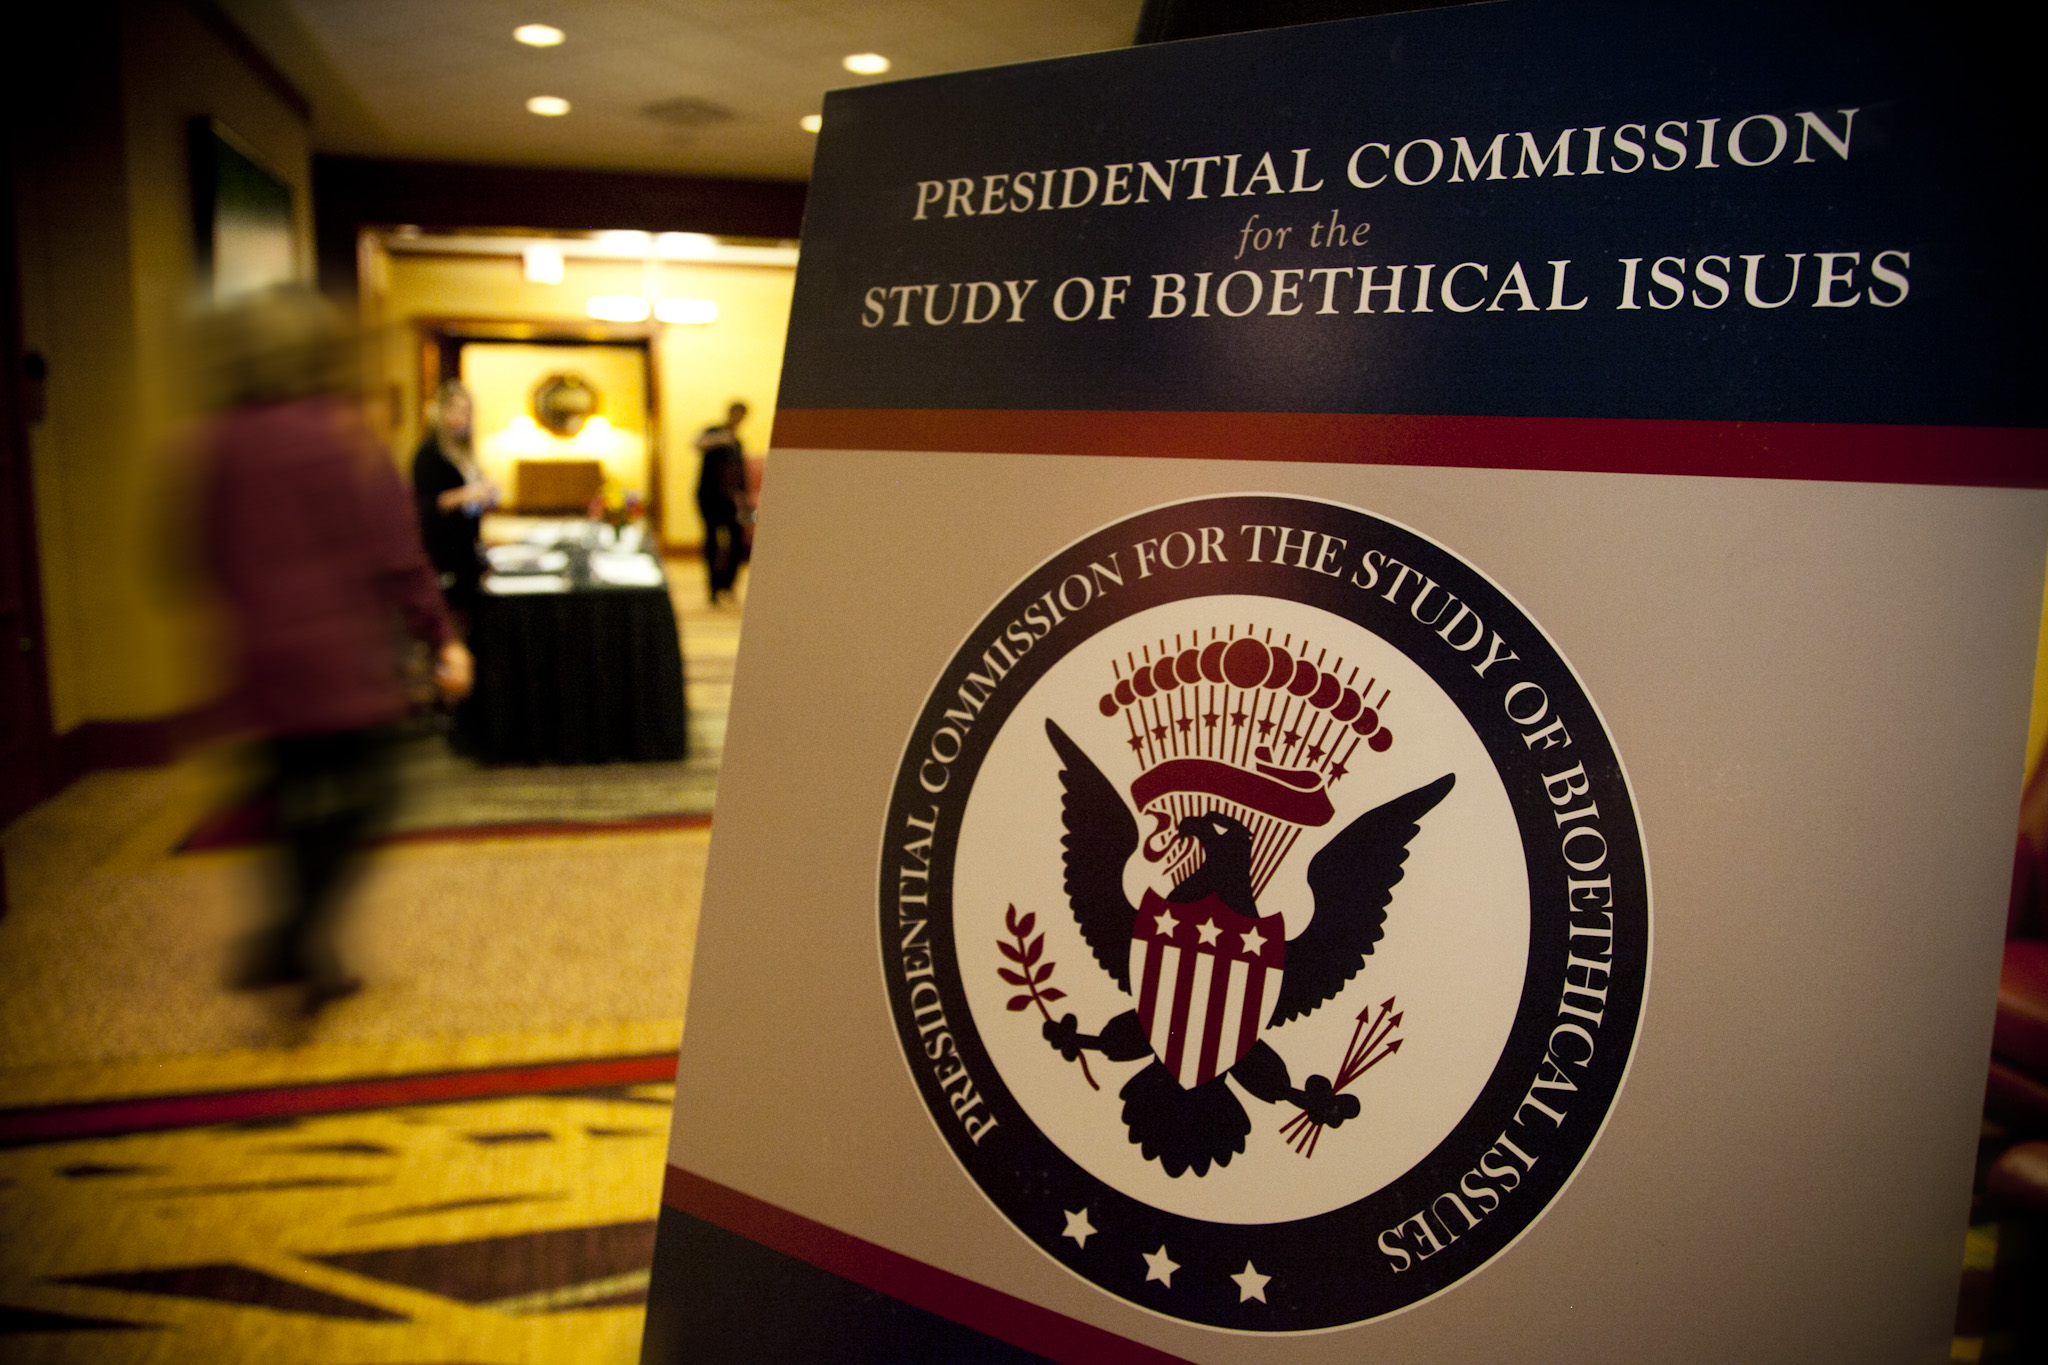 During President Obama’s administration, Lee served as executive director of the Presidential Bioethics Commission from 2012-17. The Presidential Commission for the Study of Bioethical Issues (the Bioethics Commission) advised the president on bioethical issues arising from advances in biomedicine and related areas of science and technology and seeks to identify and promote policies and practices that ensure scientific research, health care delivery, and technological innovation are conducted in a socially and ethically responsible manner.